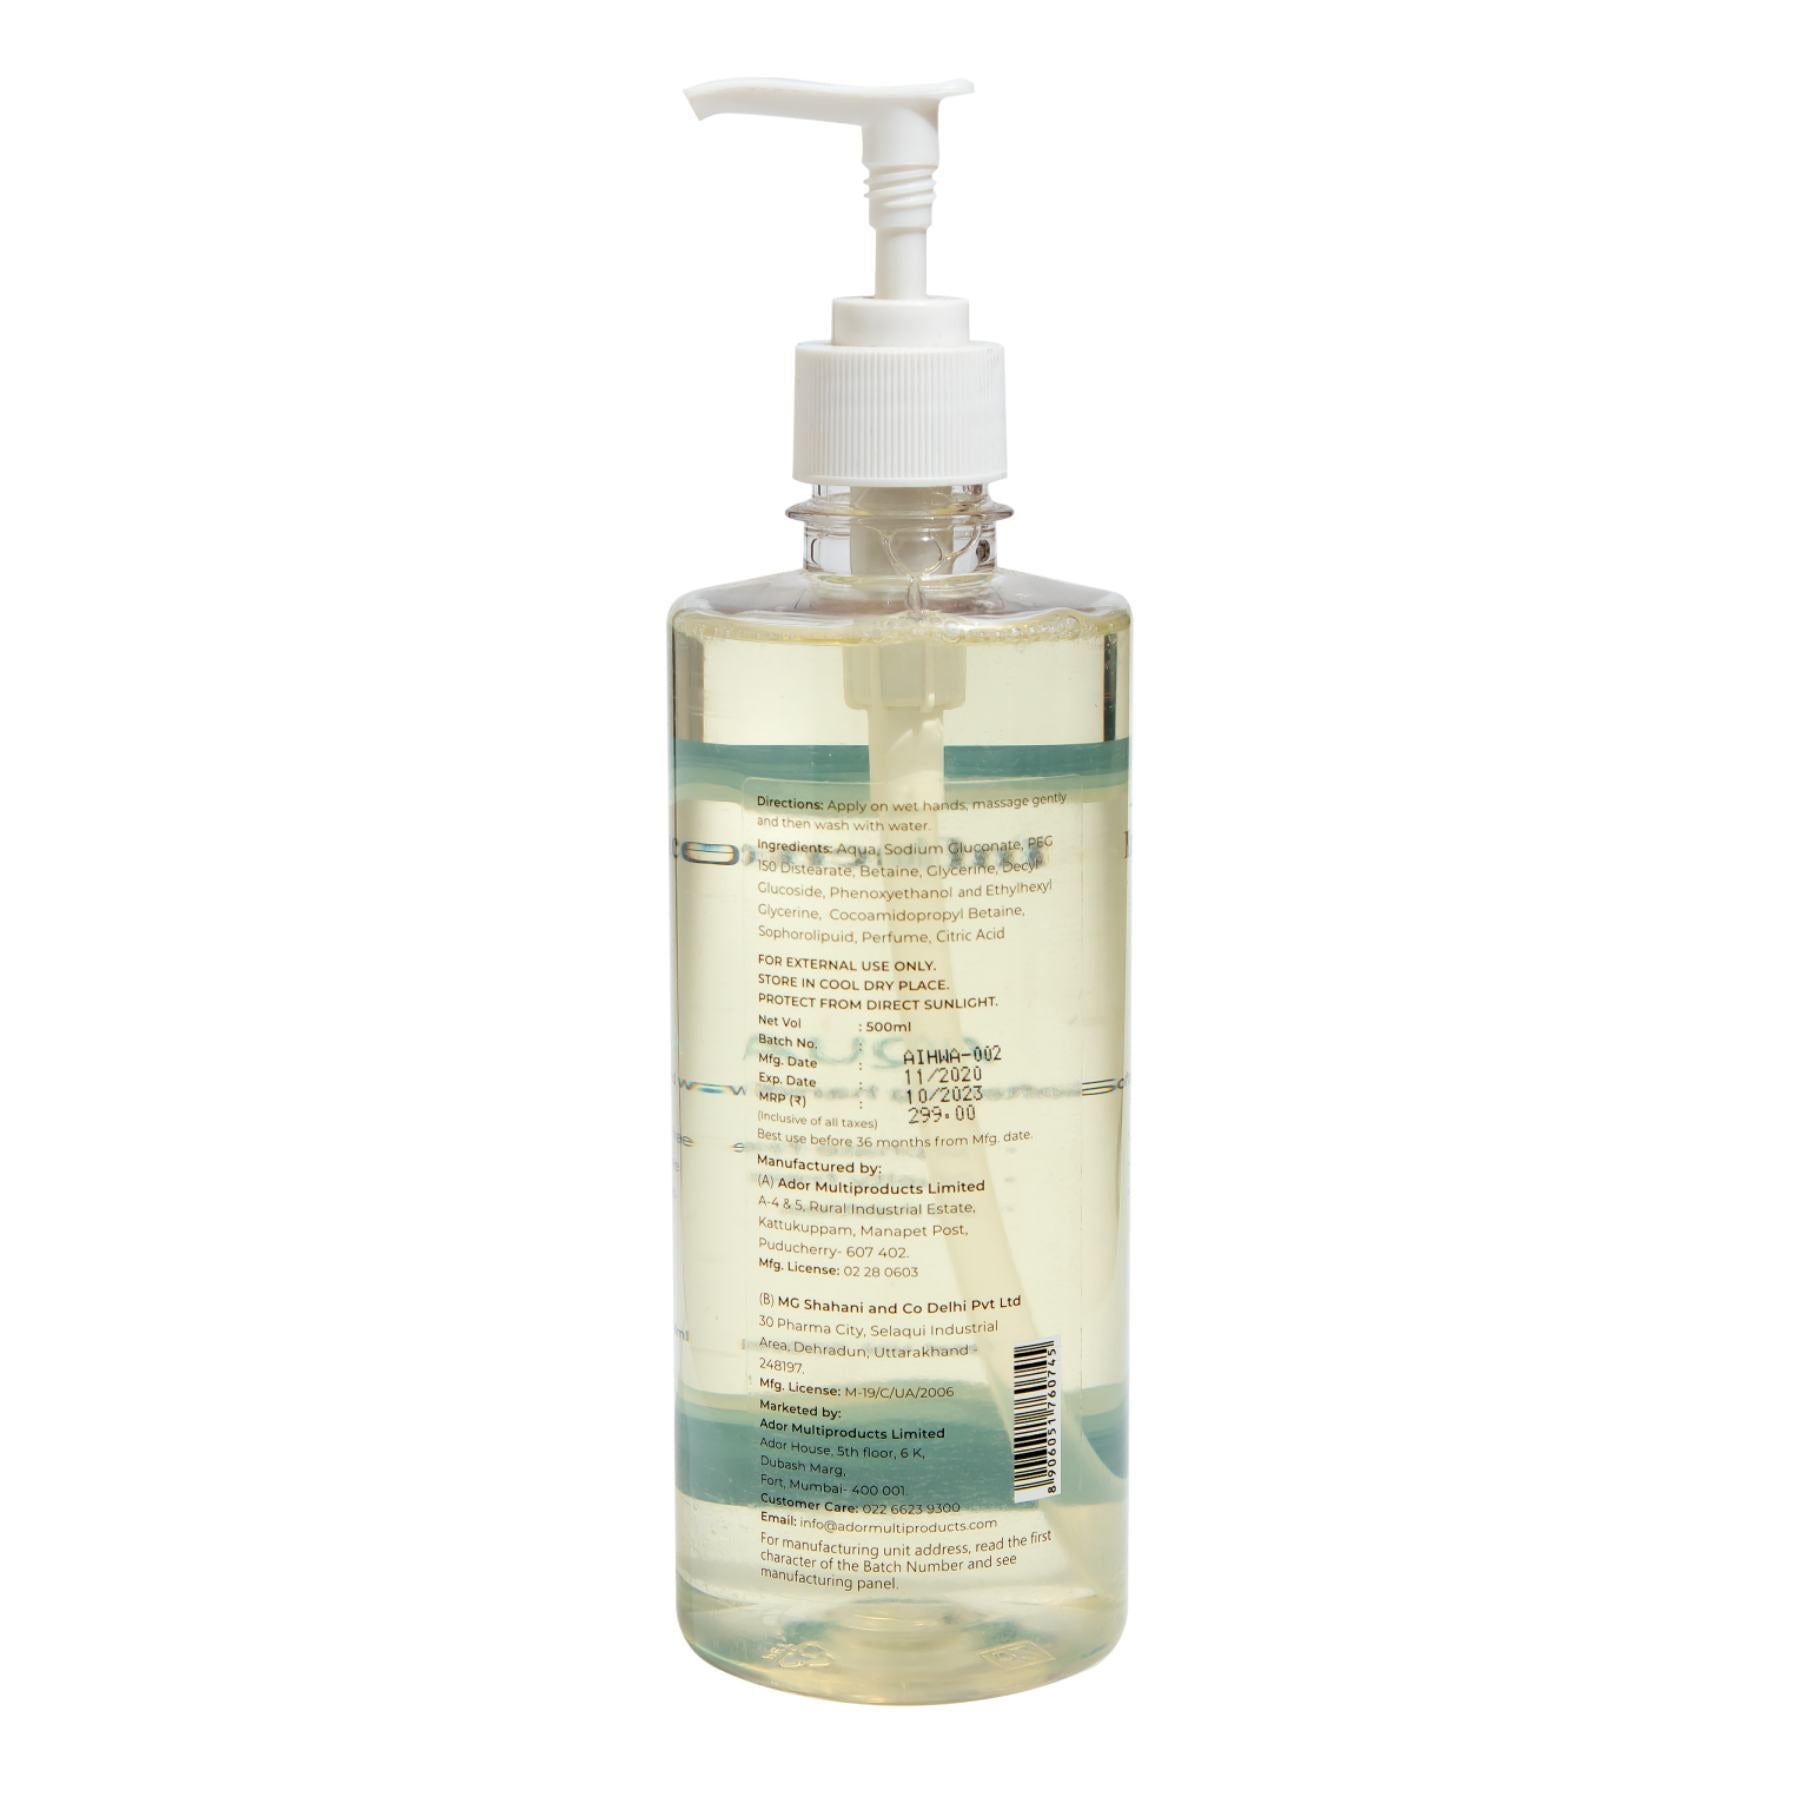 Shop Influence Aqua Hand Wash (500 ml) on Sublime Life. Kills Germs and Keeps your Hands Clean